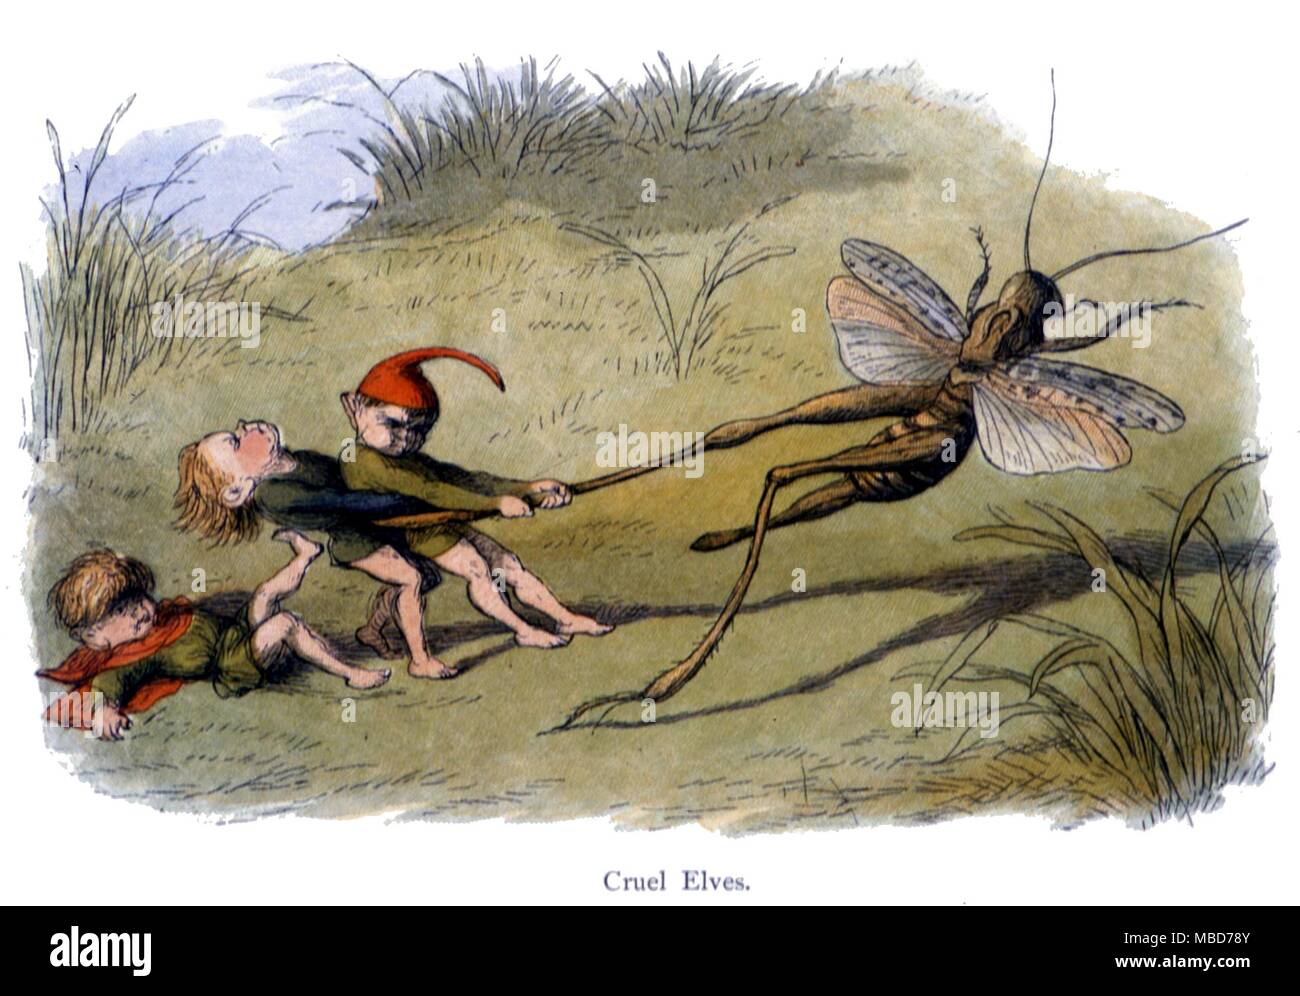 Fairies and elves - Cruel Elves - from Richard Doyle's In Fairyland - a series of pictures from the Elf-World - 1875 Stock Photo